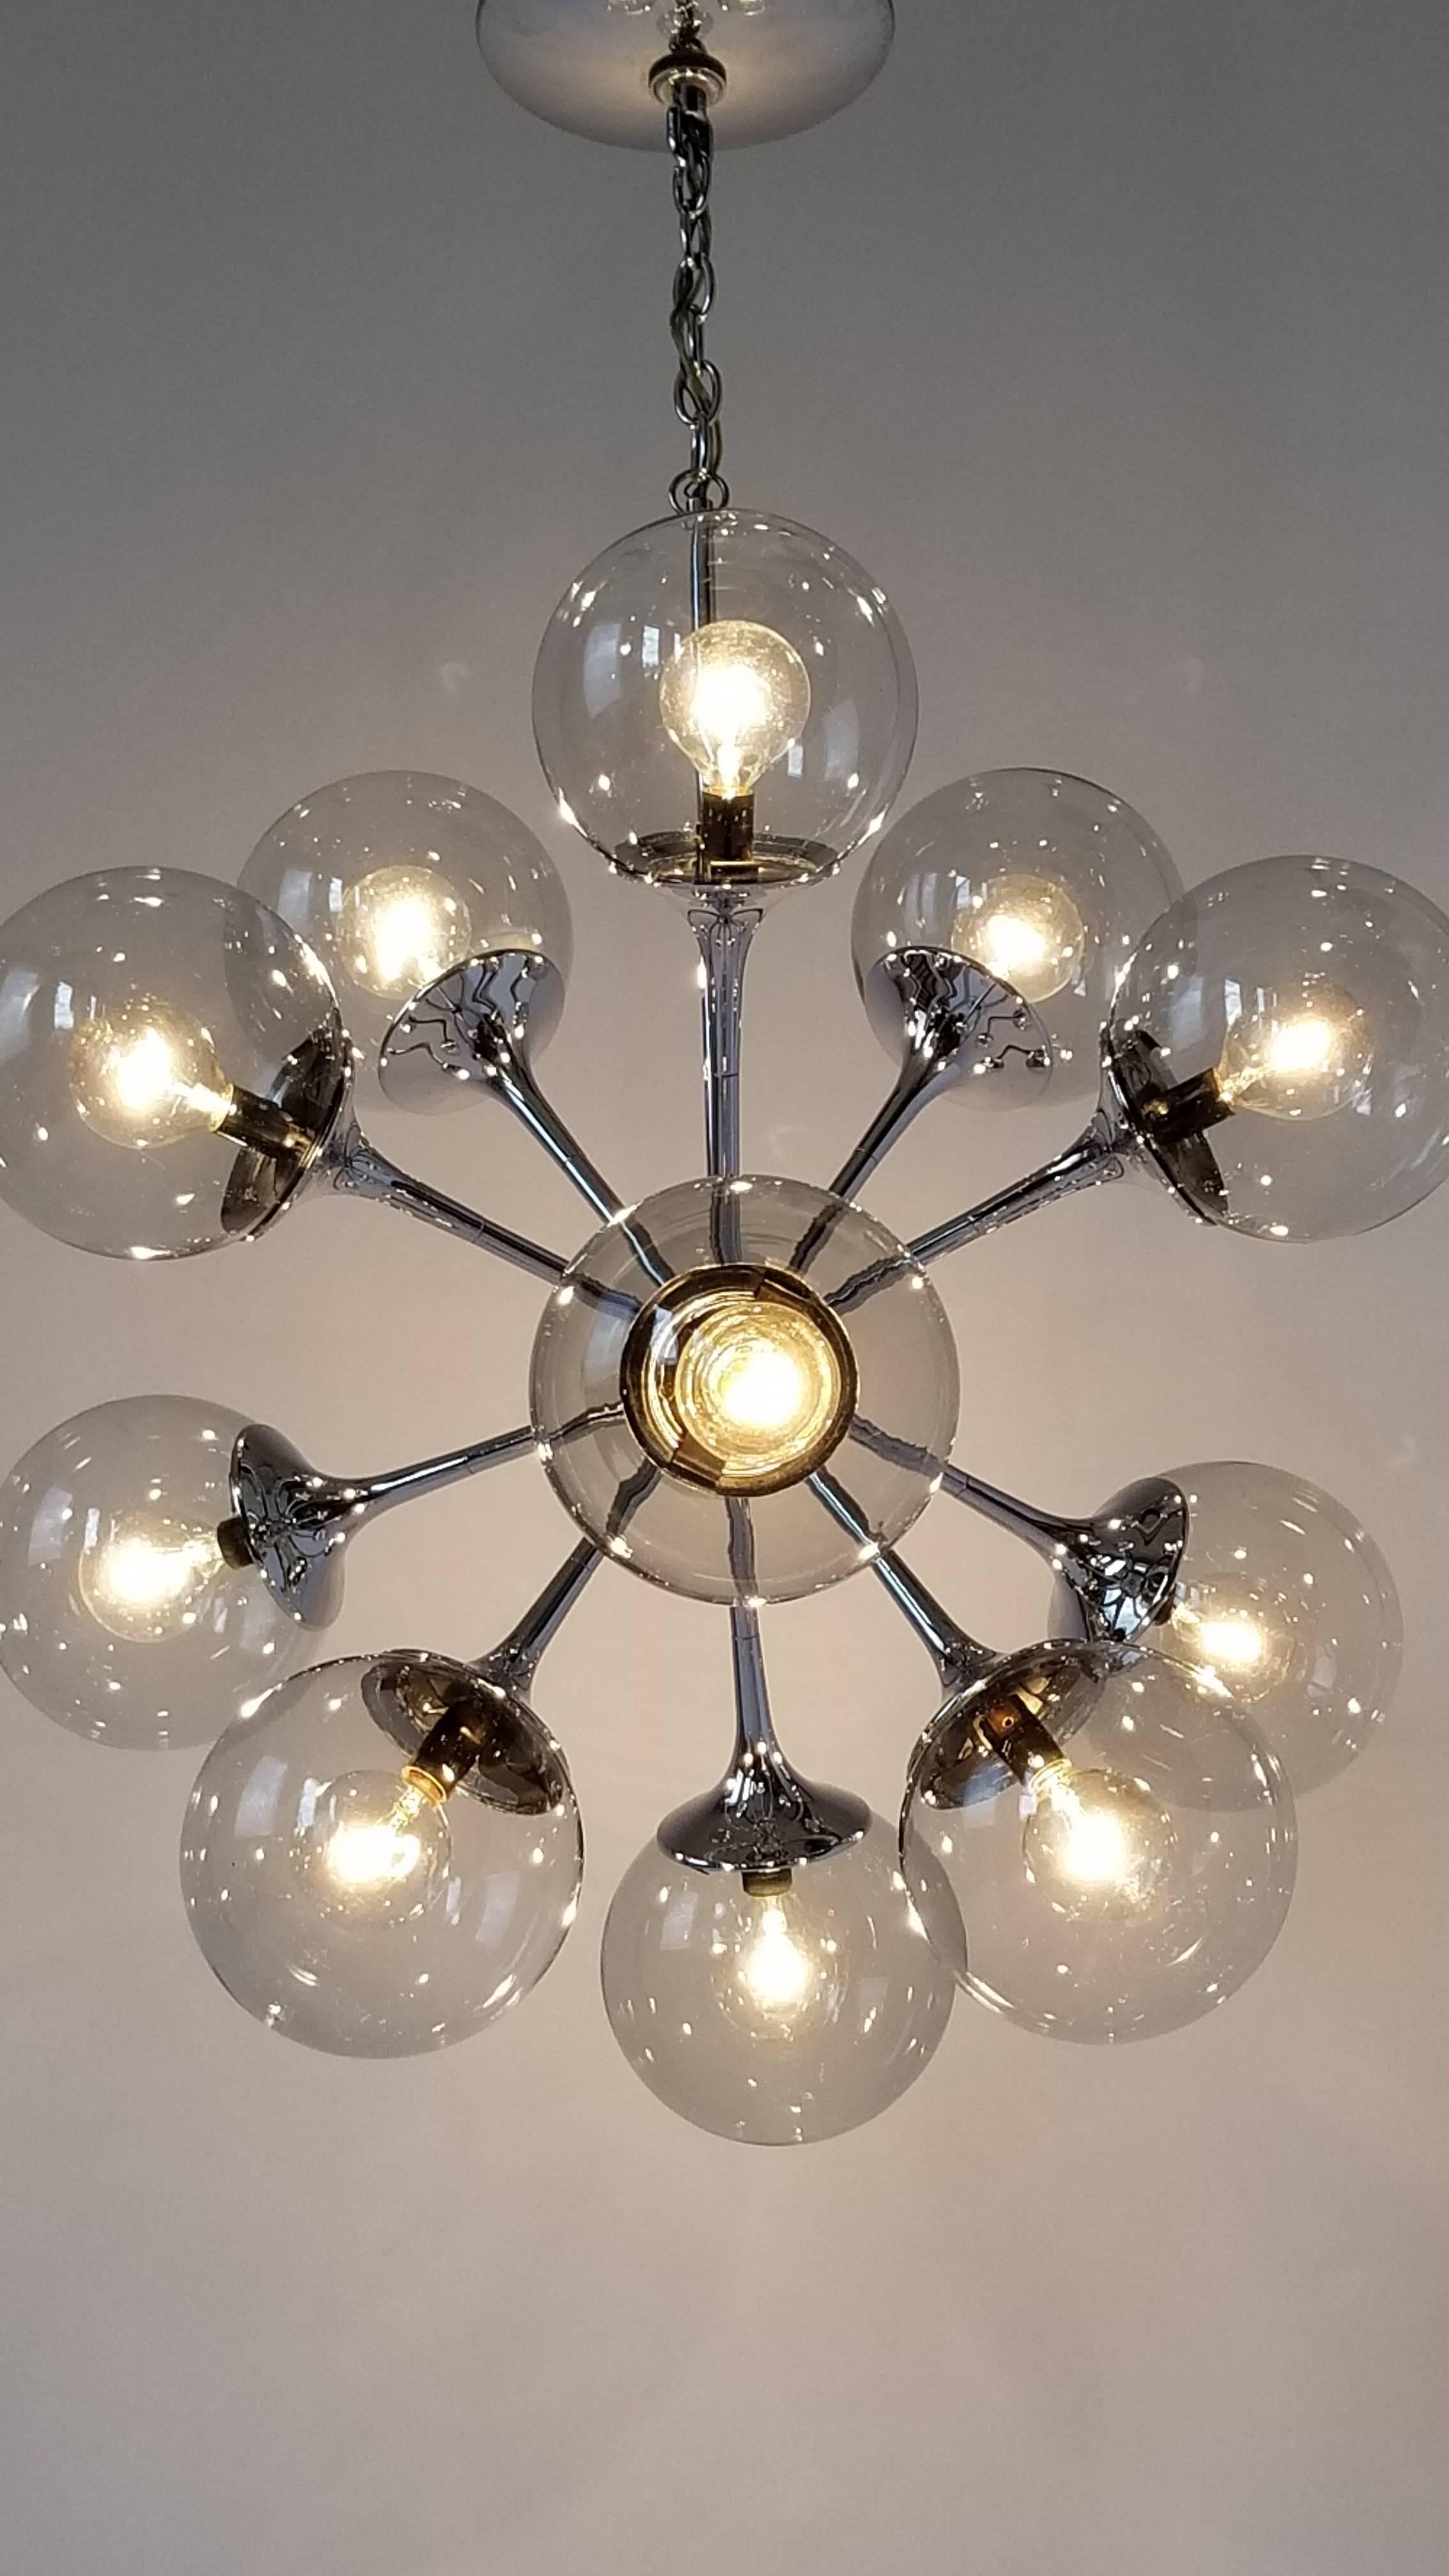 chandelier with glass globes